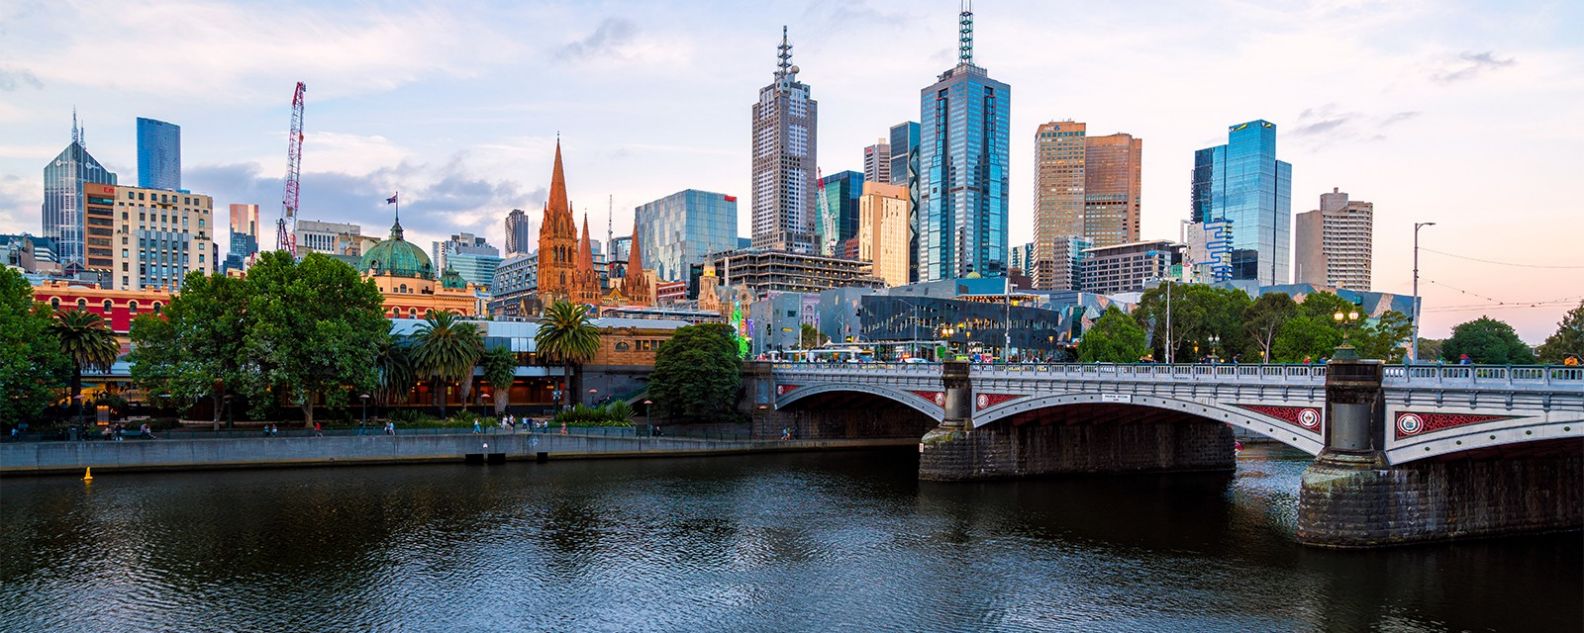 Melbourne, Australia downtown with river in foreground